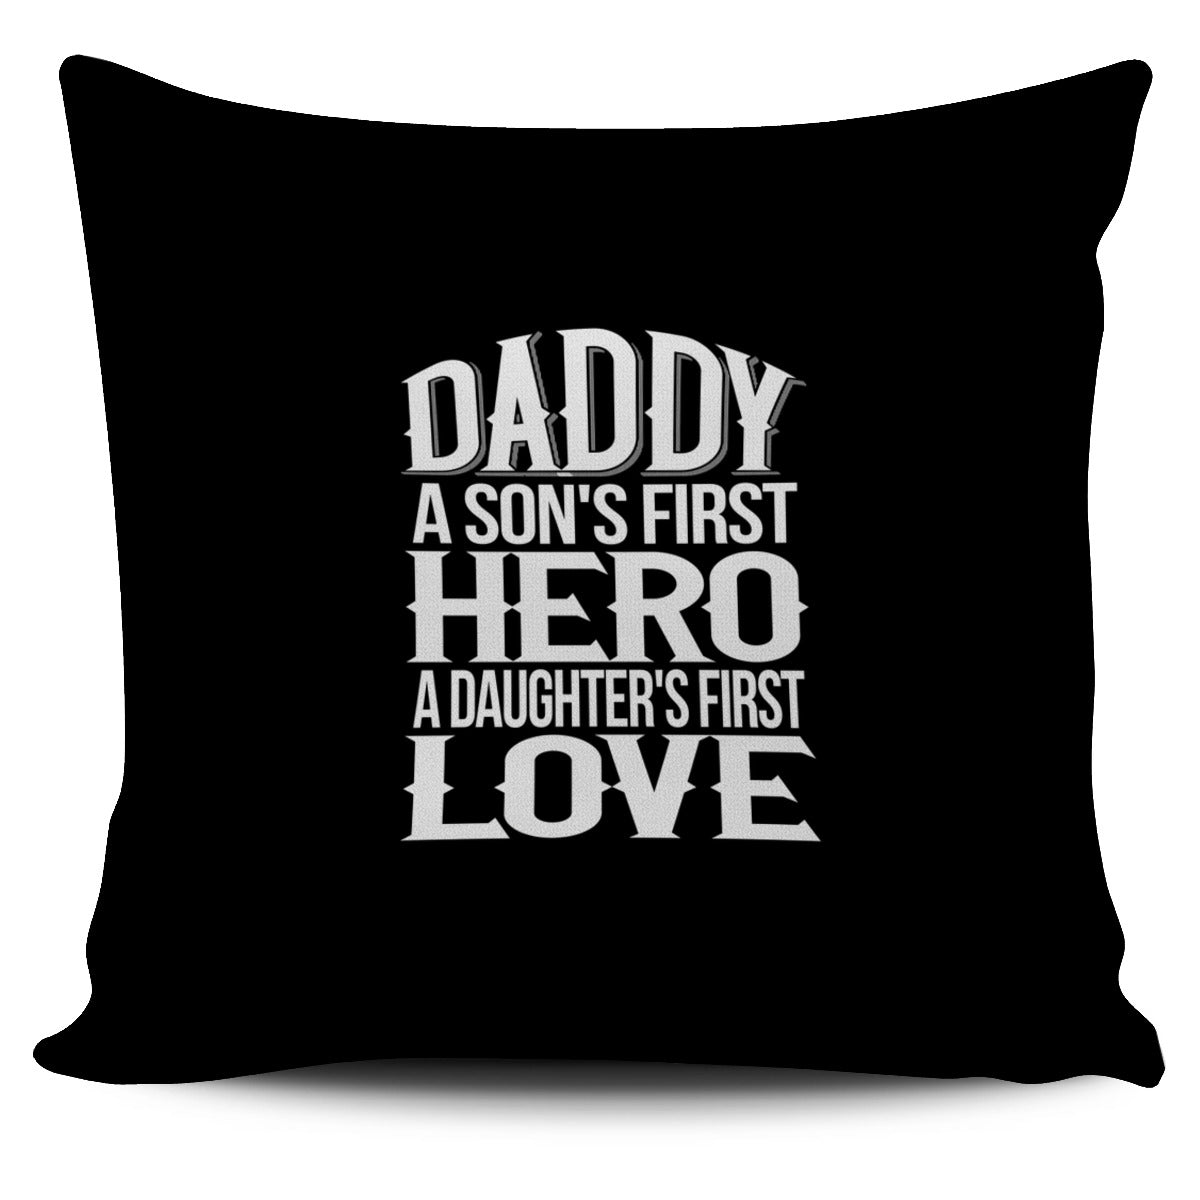 Daddy Is Son's Hero And Daughter's First Love Pillow Cover